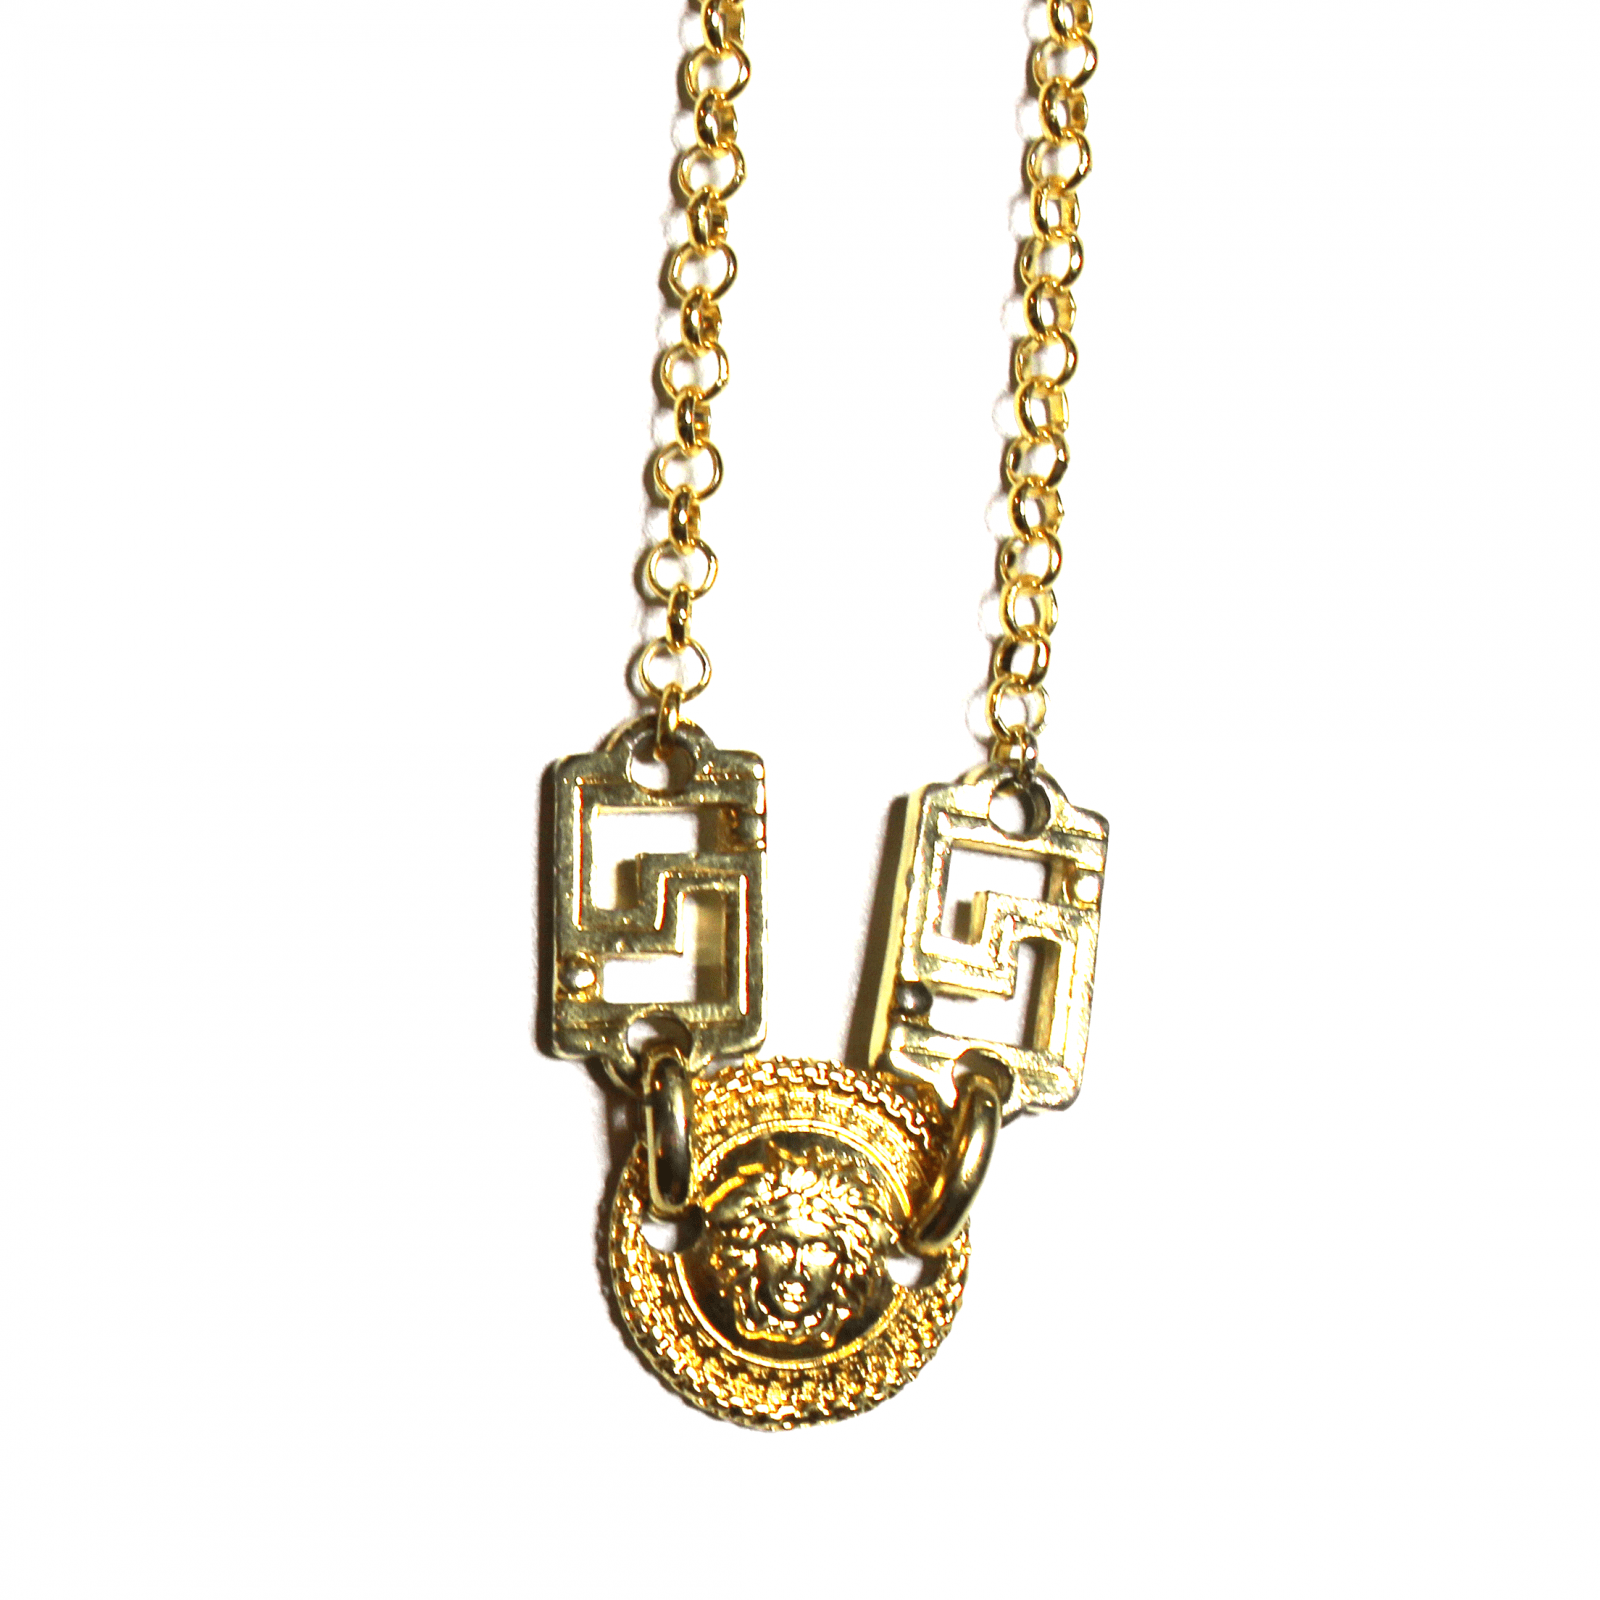 Small Gold Gianni Versace Single Sided Medusa Head Coin Chain with Greek Key Accents RSTKD Vintage